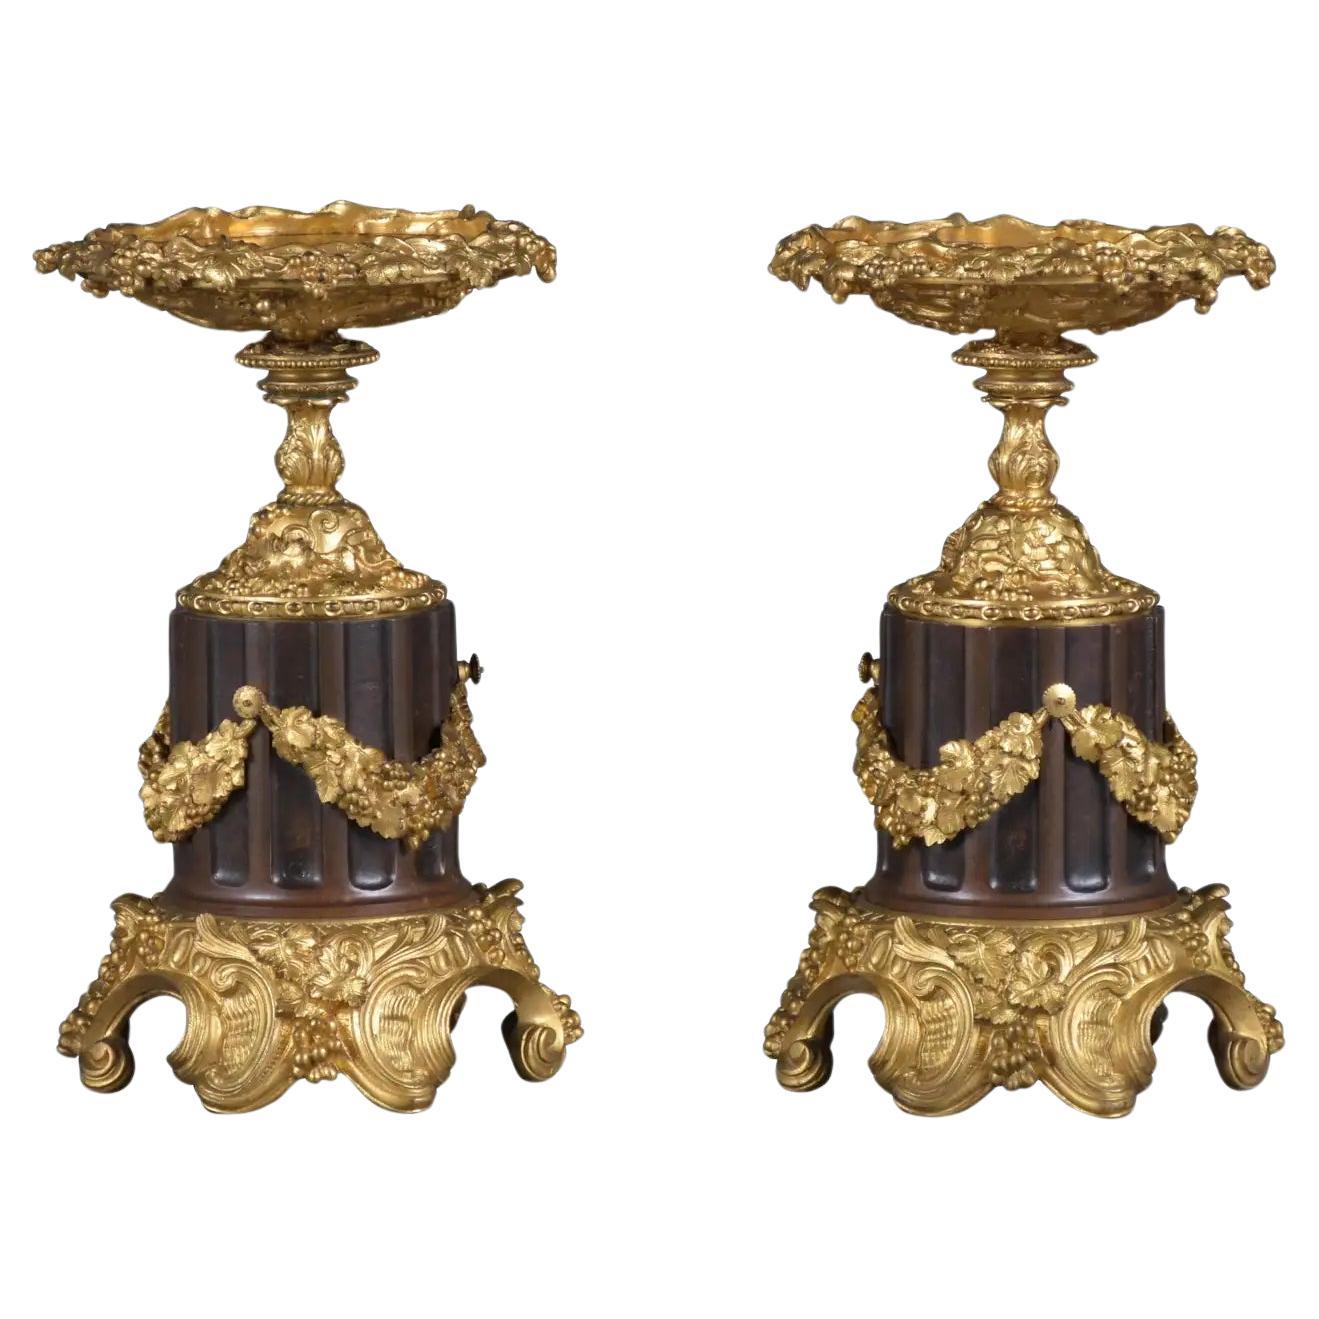 Elegant 19th-Century French Bronzed Urns with Gold Ormolu Details For Sale